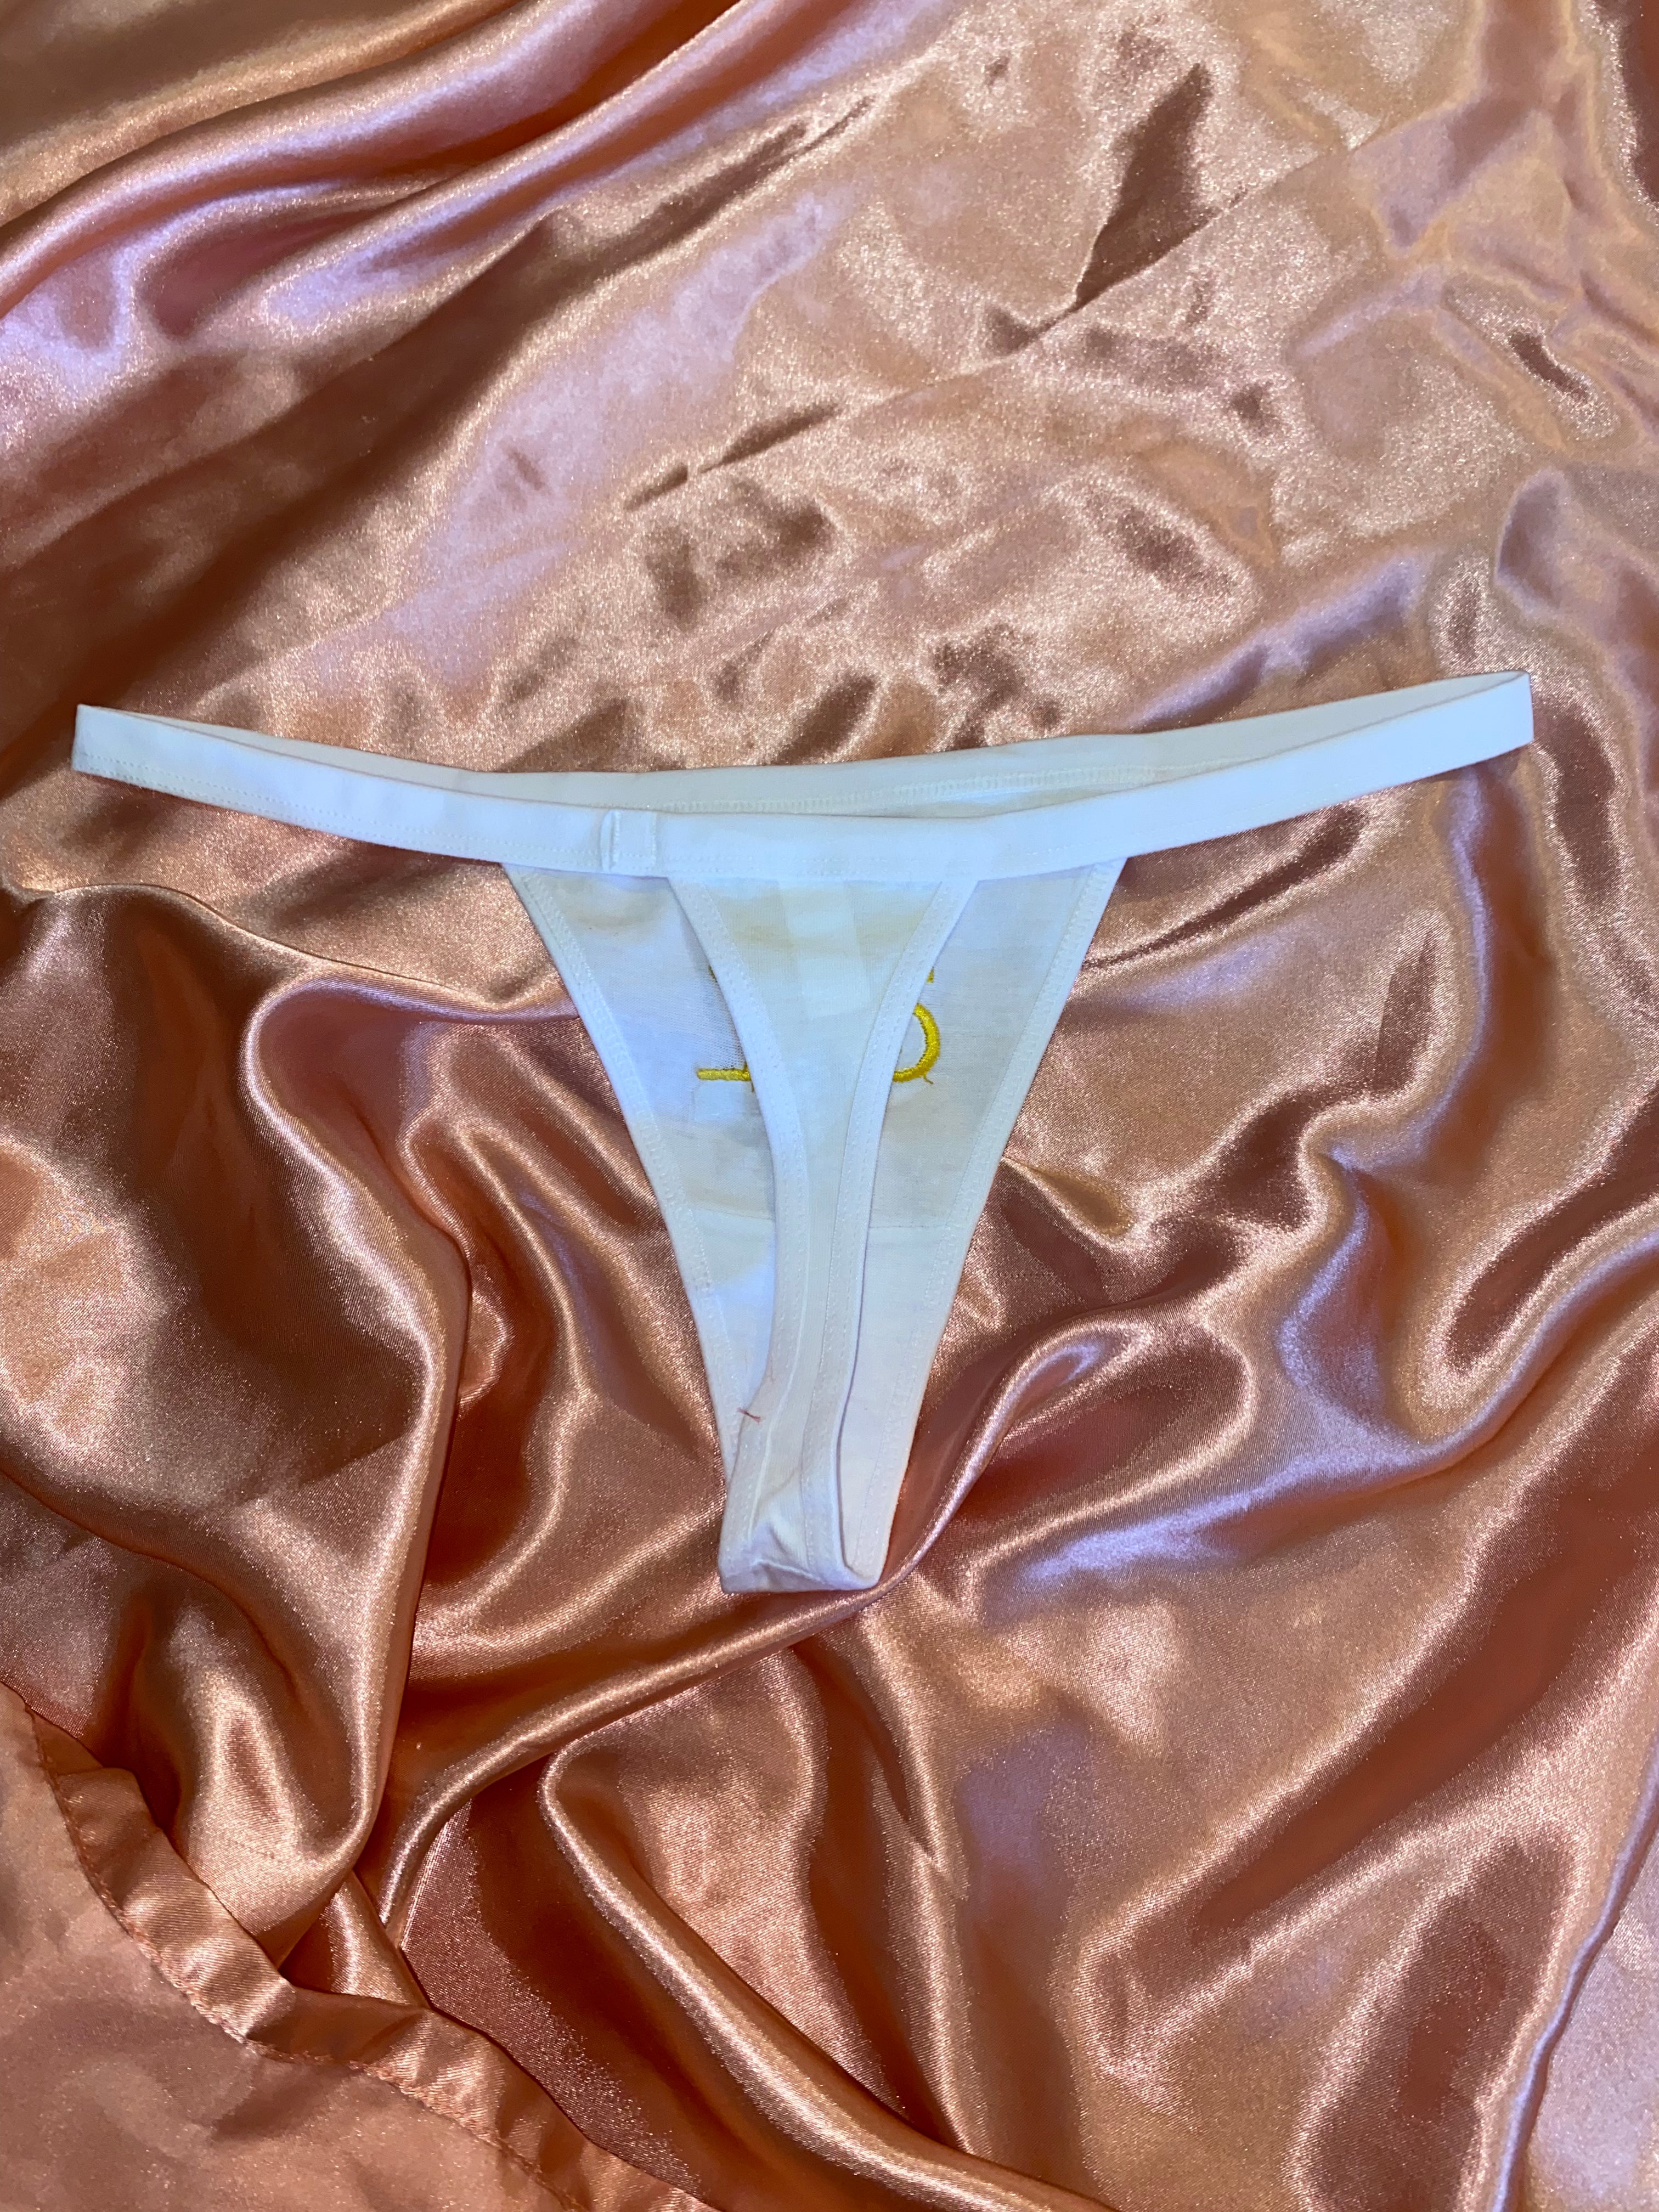 barbara mullinax recommends girl pees in thong pic